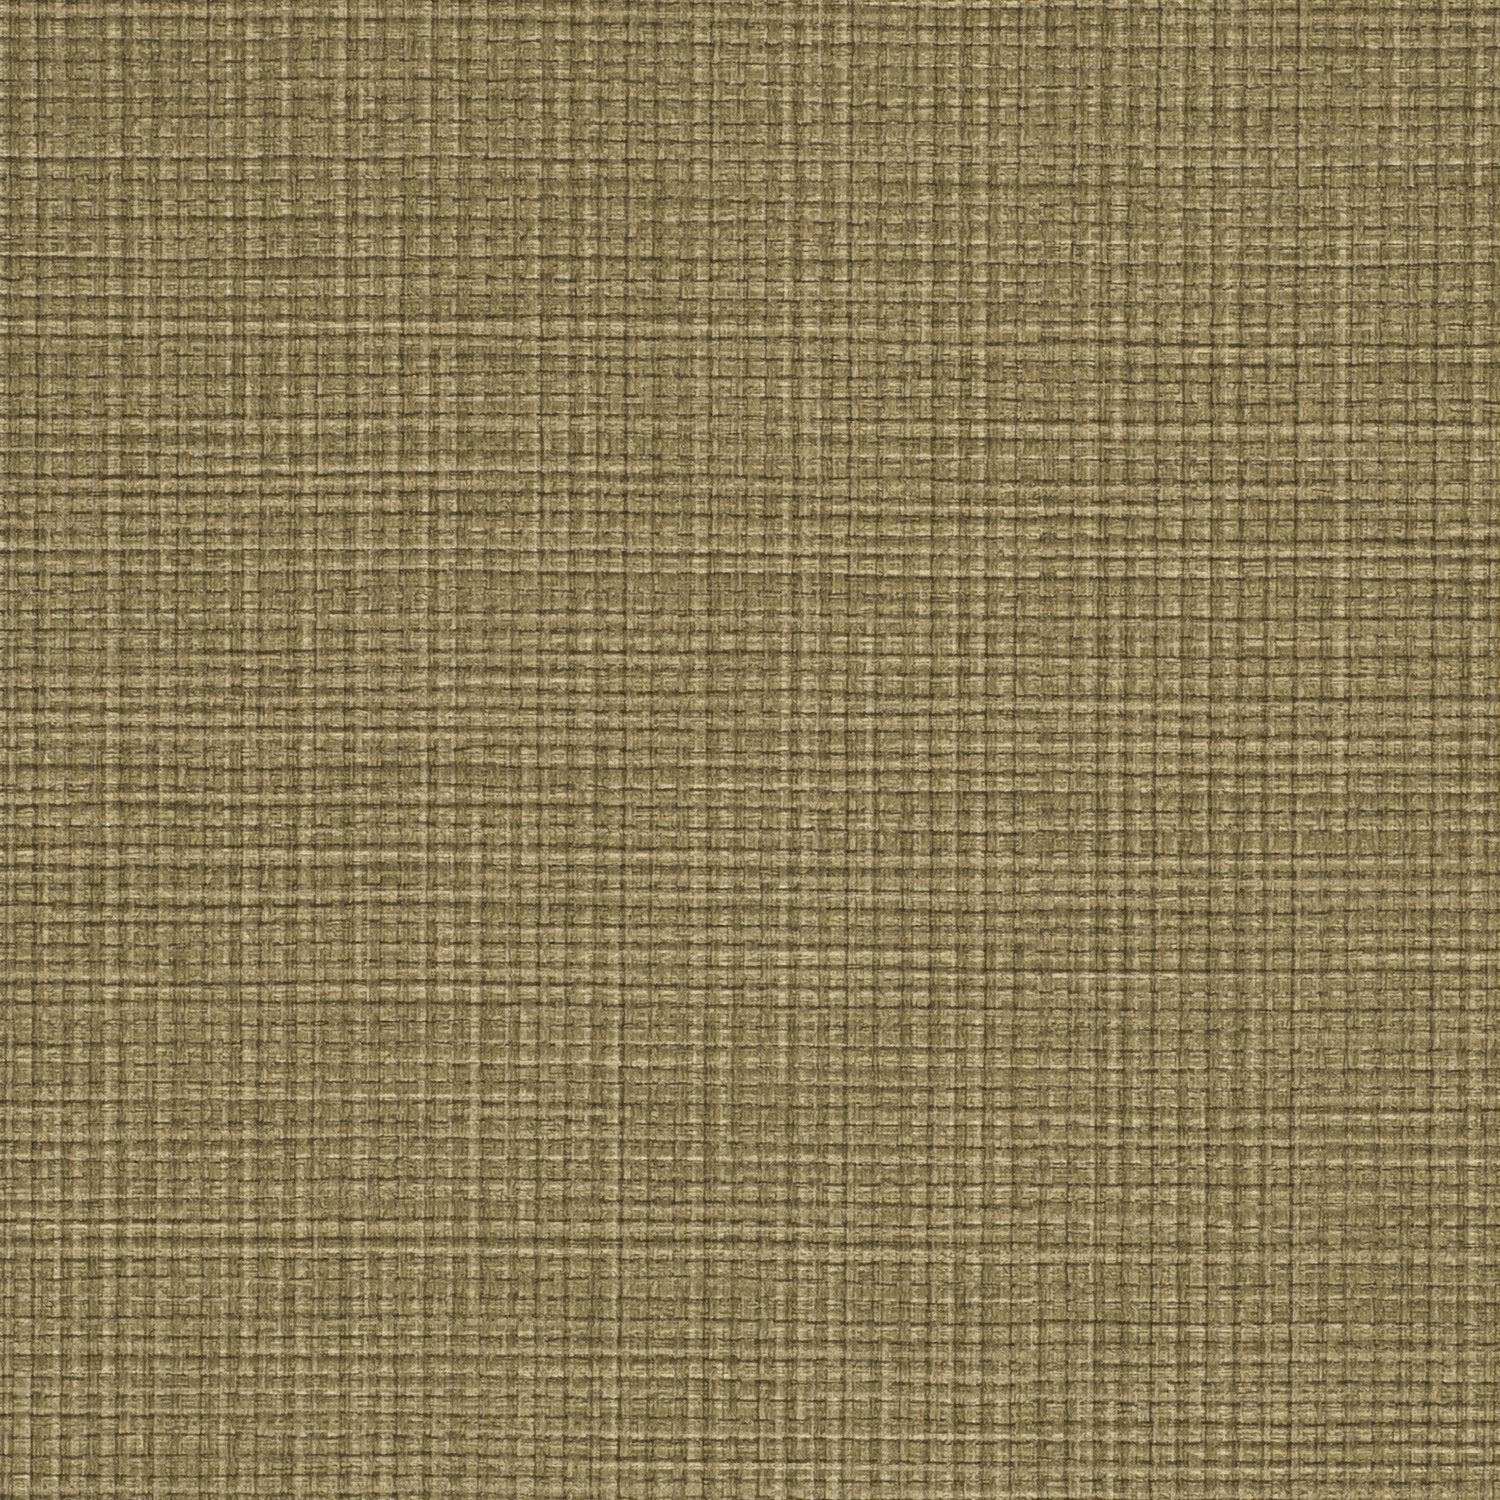 Pave - Y46302 - Wallcovering - Vycon - Kube Contract